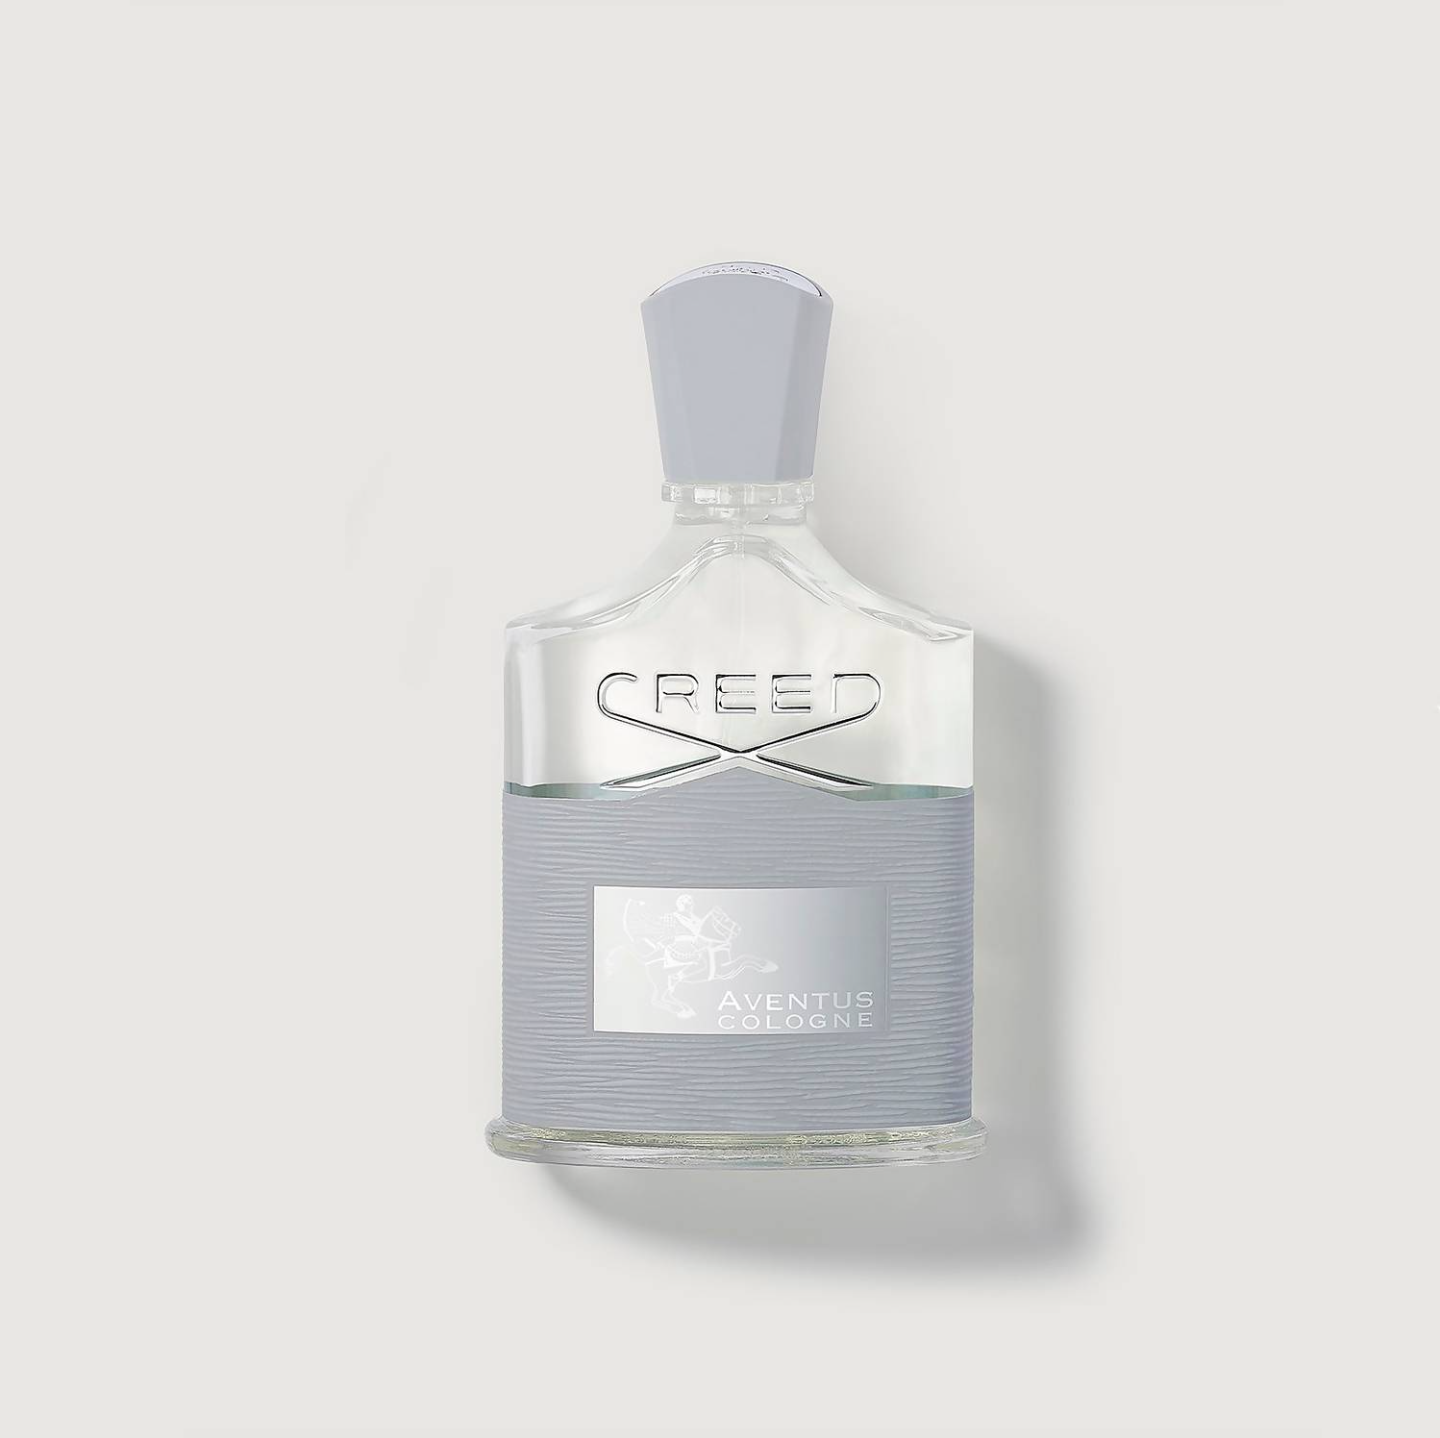 AVENTUS COLOGNE - CREED